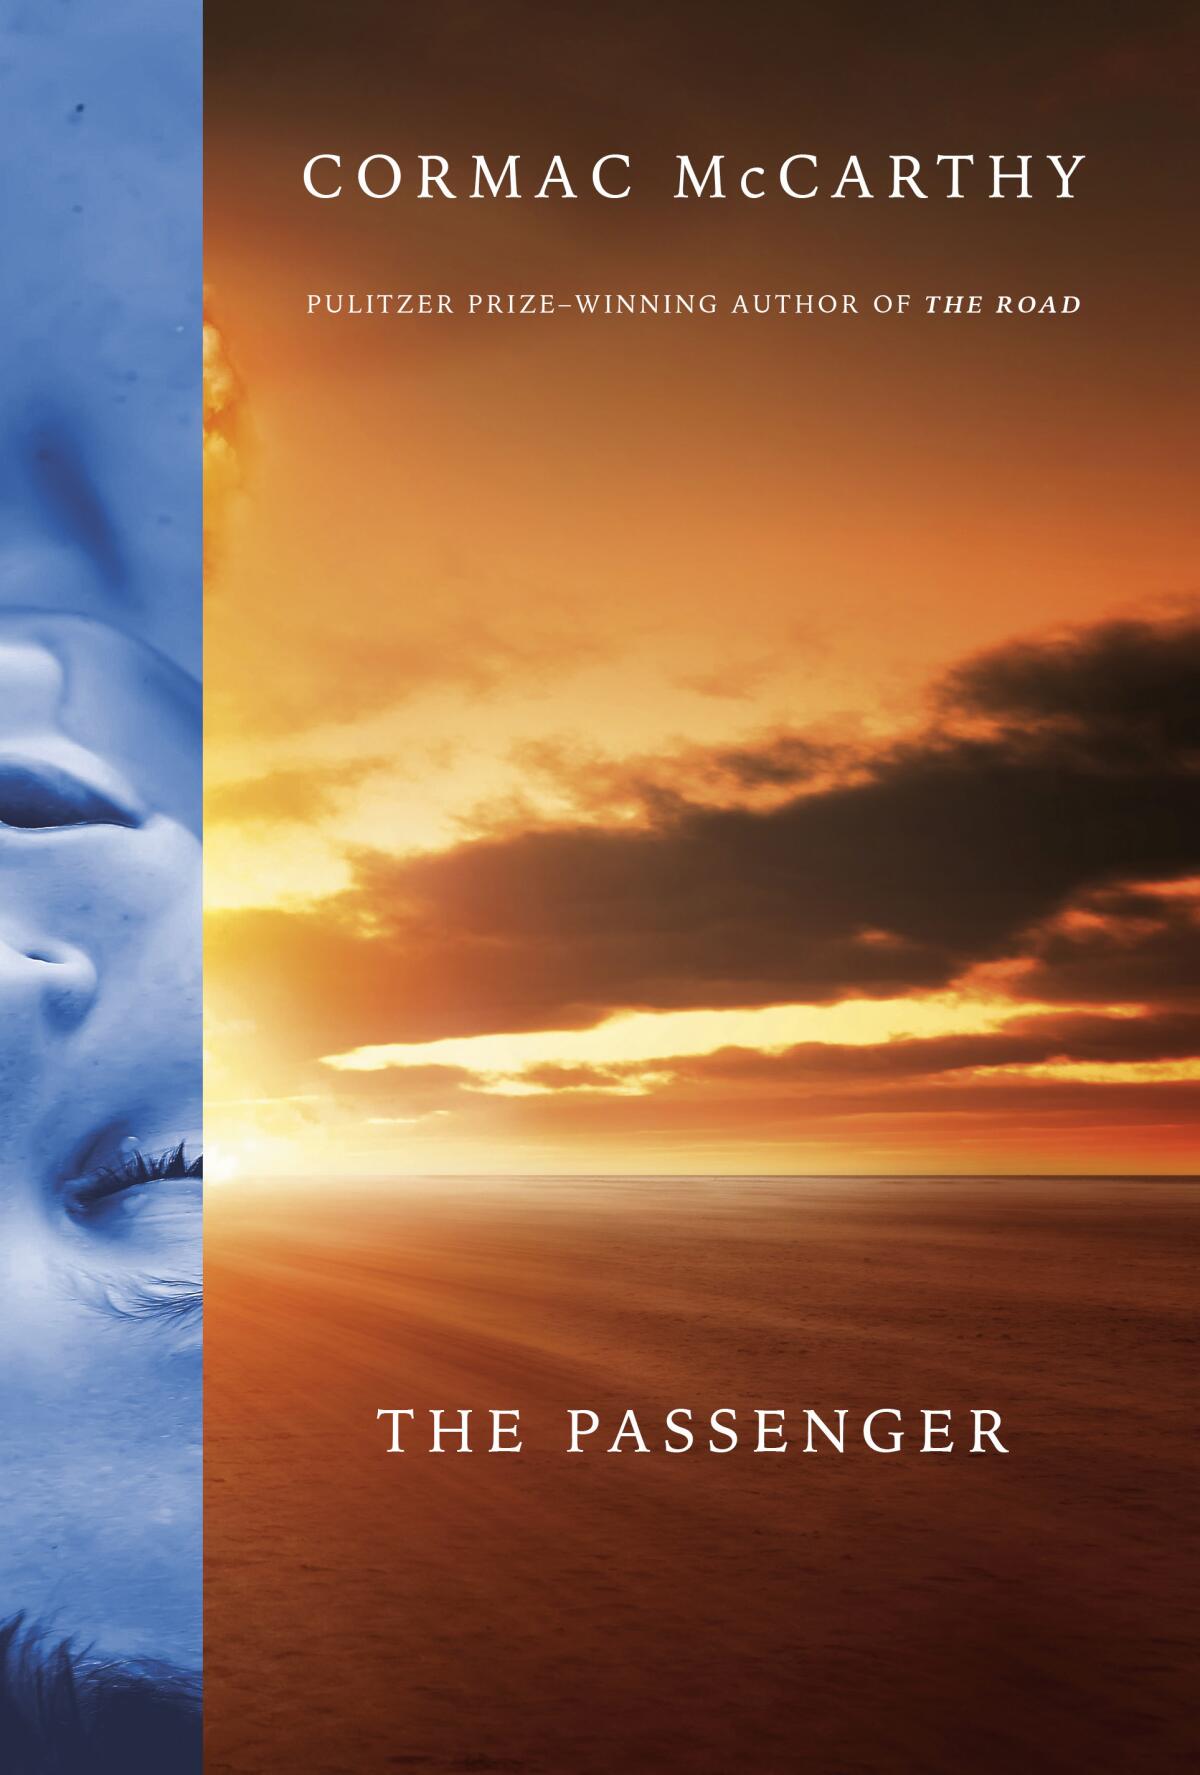 Book cover for "The Passenger," by Cormac McCarthy features sunbeams through clouds over the ocean 